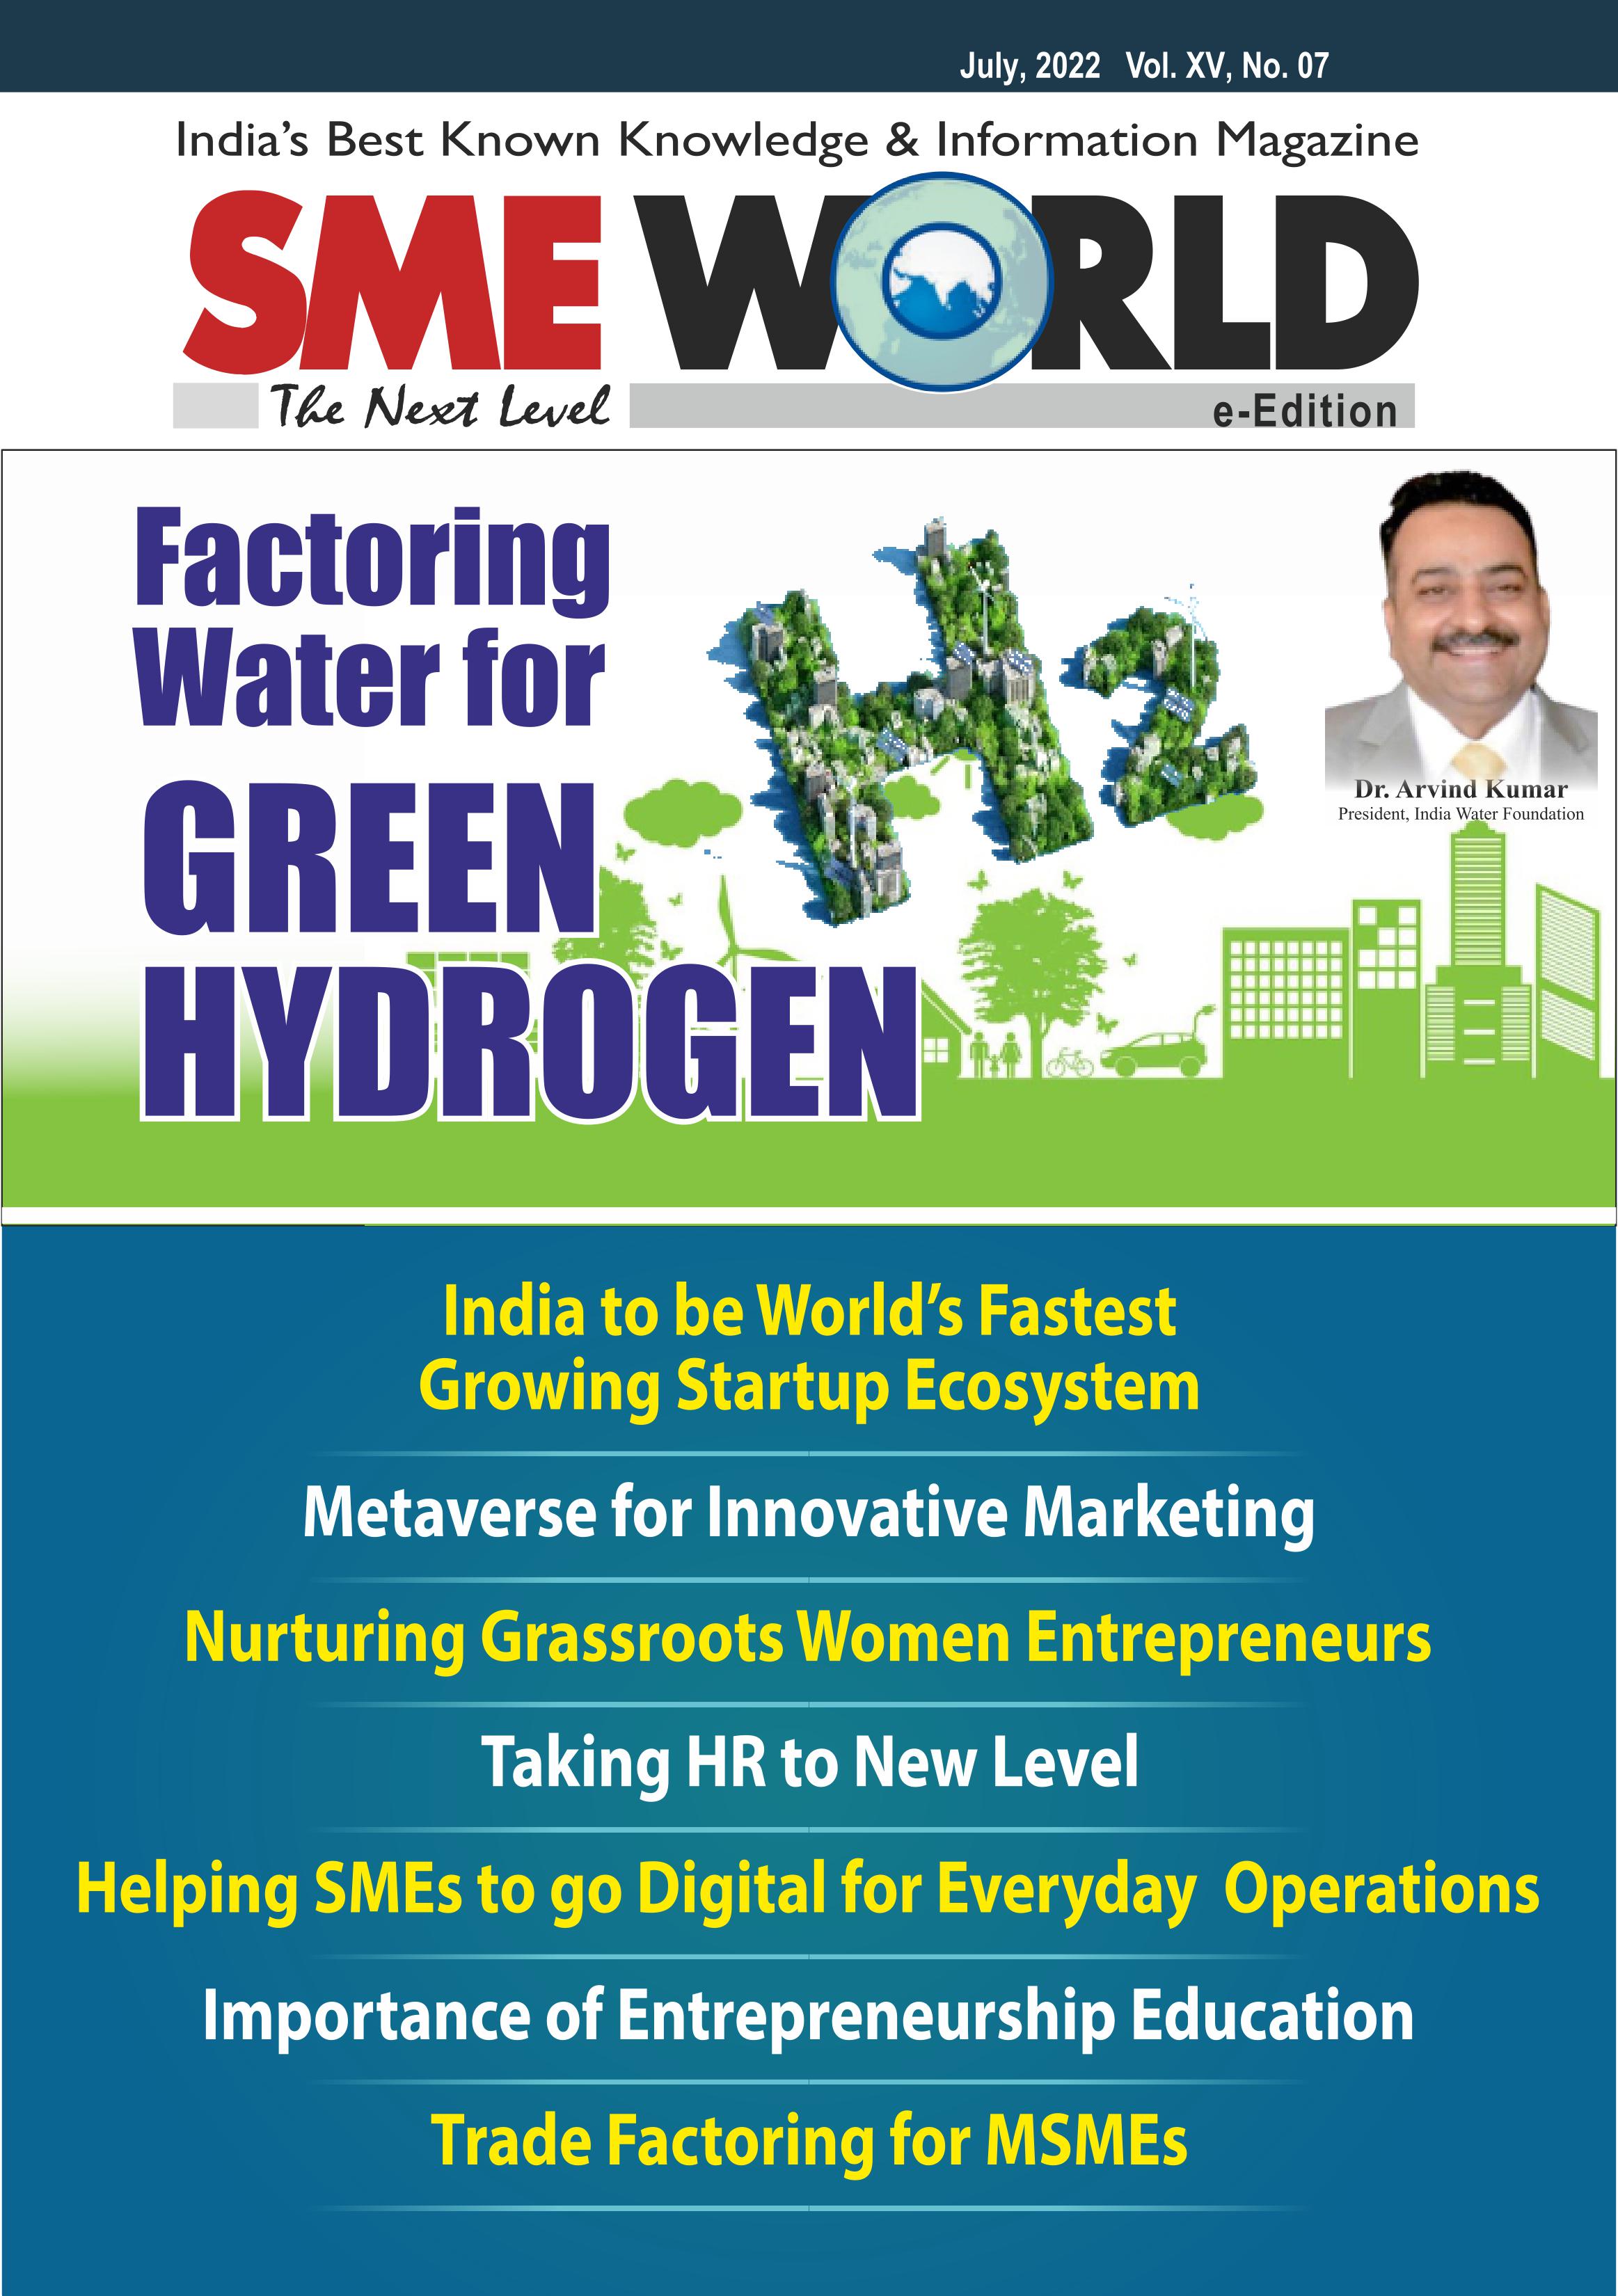 Dear Friends, India Water Foundation made the first official presentation for the Ministry of Petroleum and Natural Gas Govt of India, on &#039;Facto...